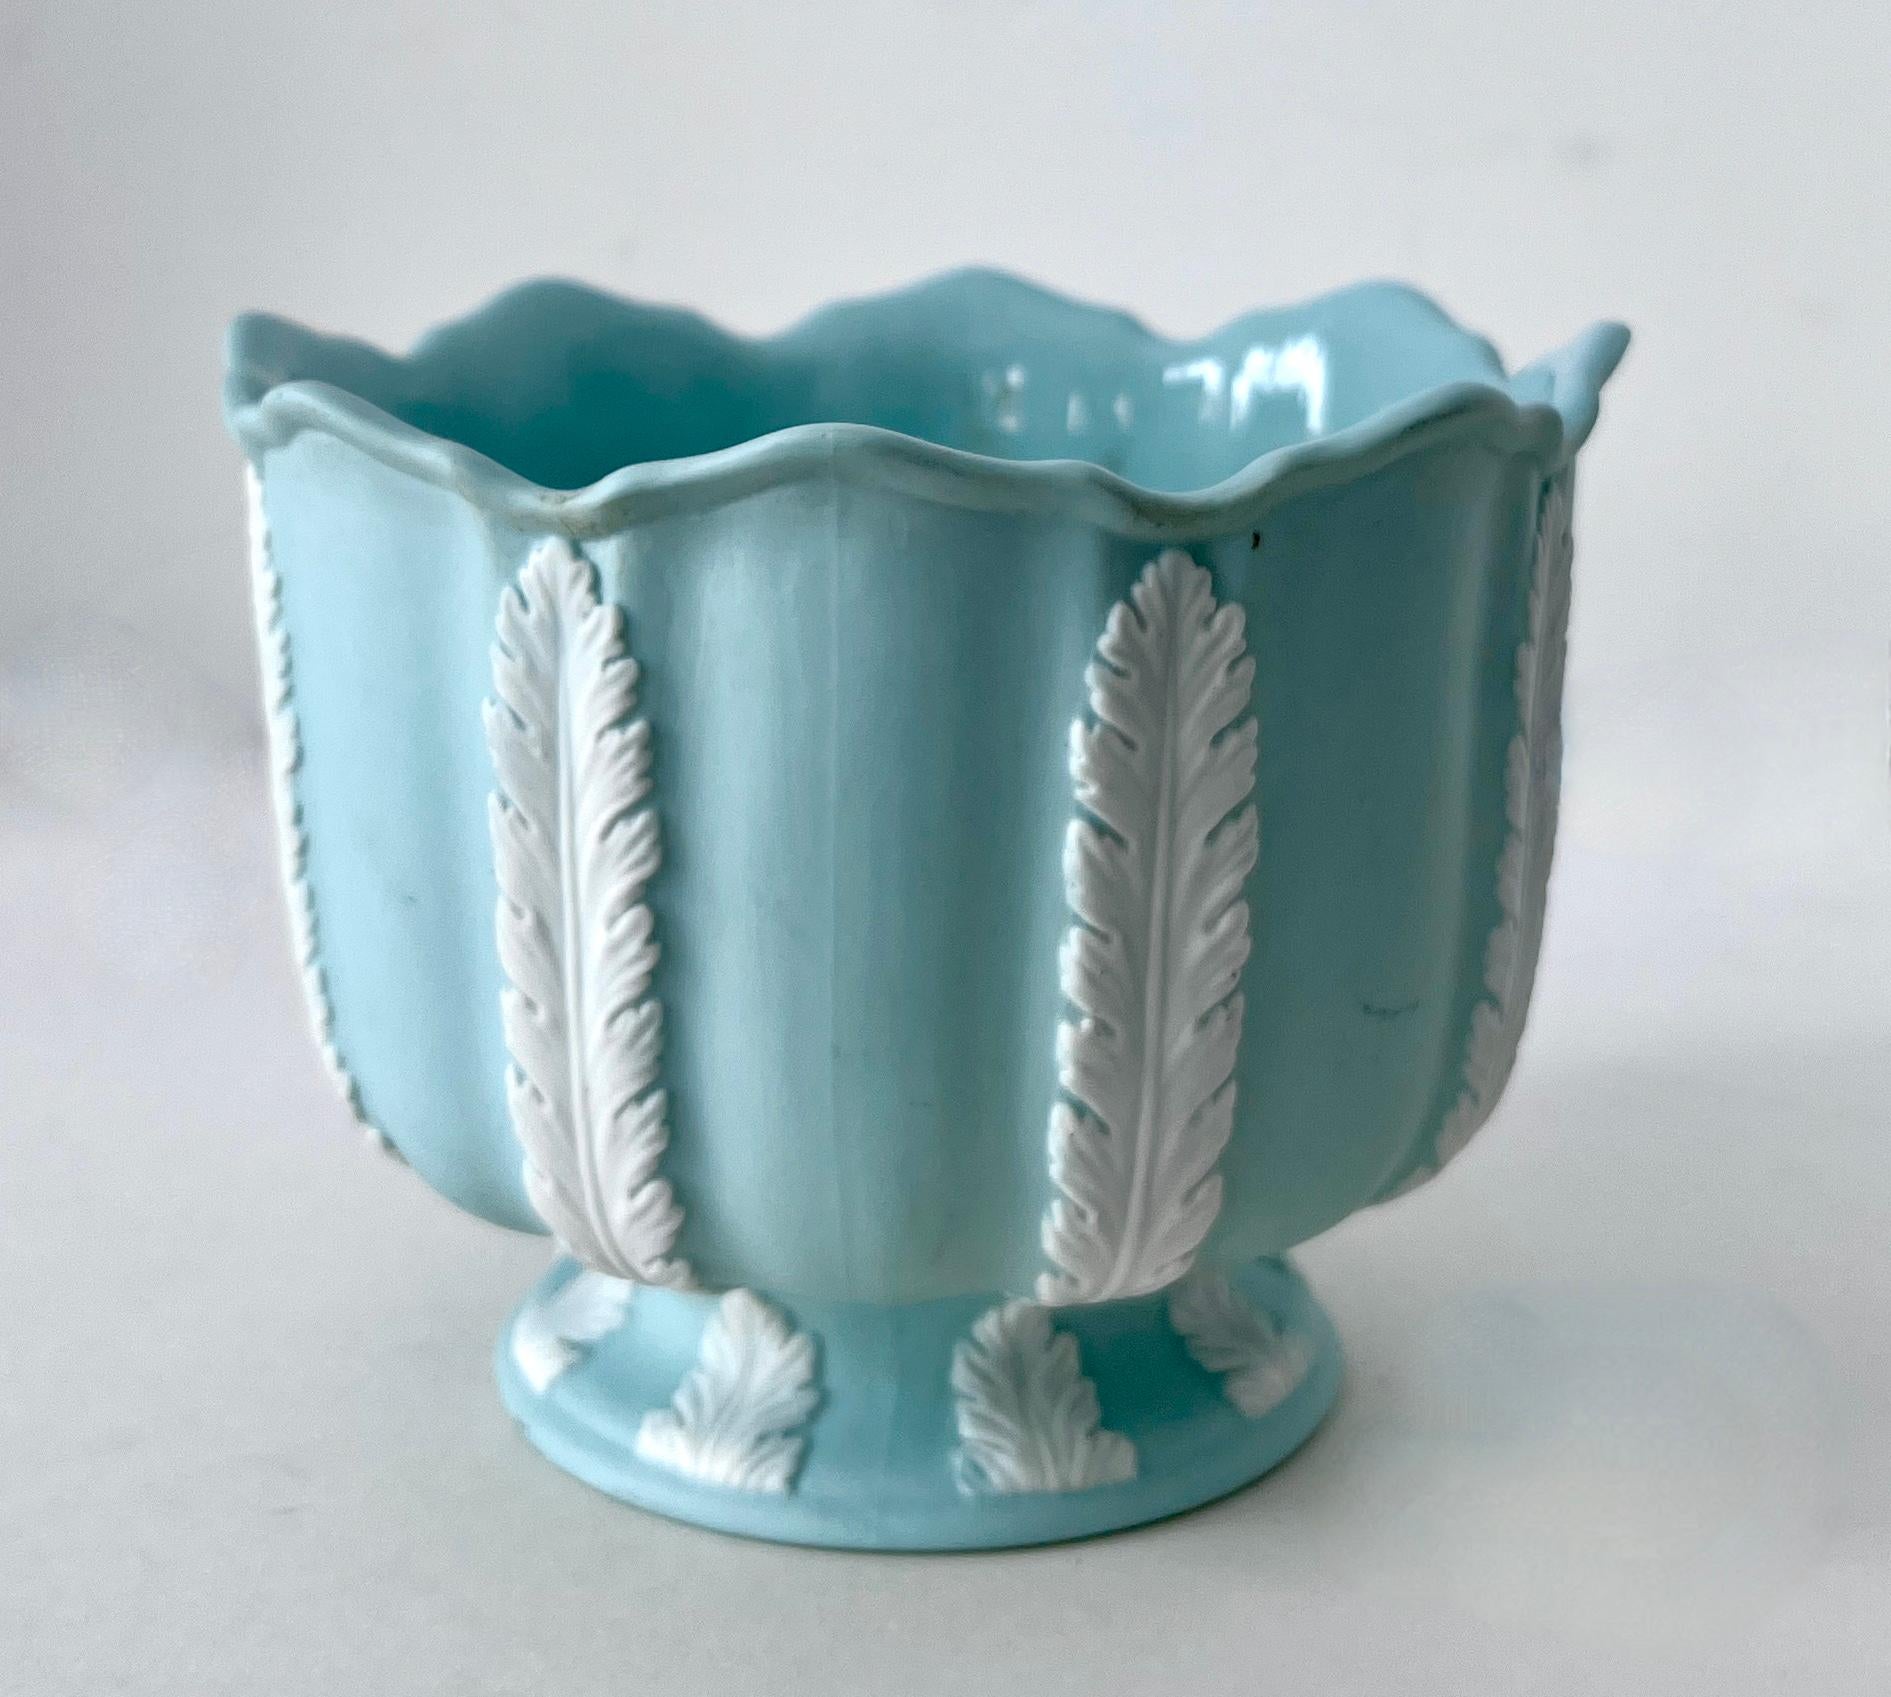 A unique vintage piece with graphic white leaves and smooth satin bisque or ceramic Tiffany blue field.

This is a wonderfully decorative piece - while you could use it for candy, mail, or office supplies, it also would make a terrific planter for